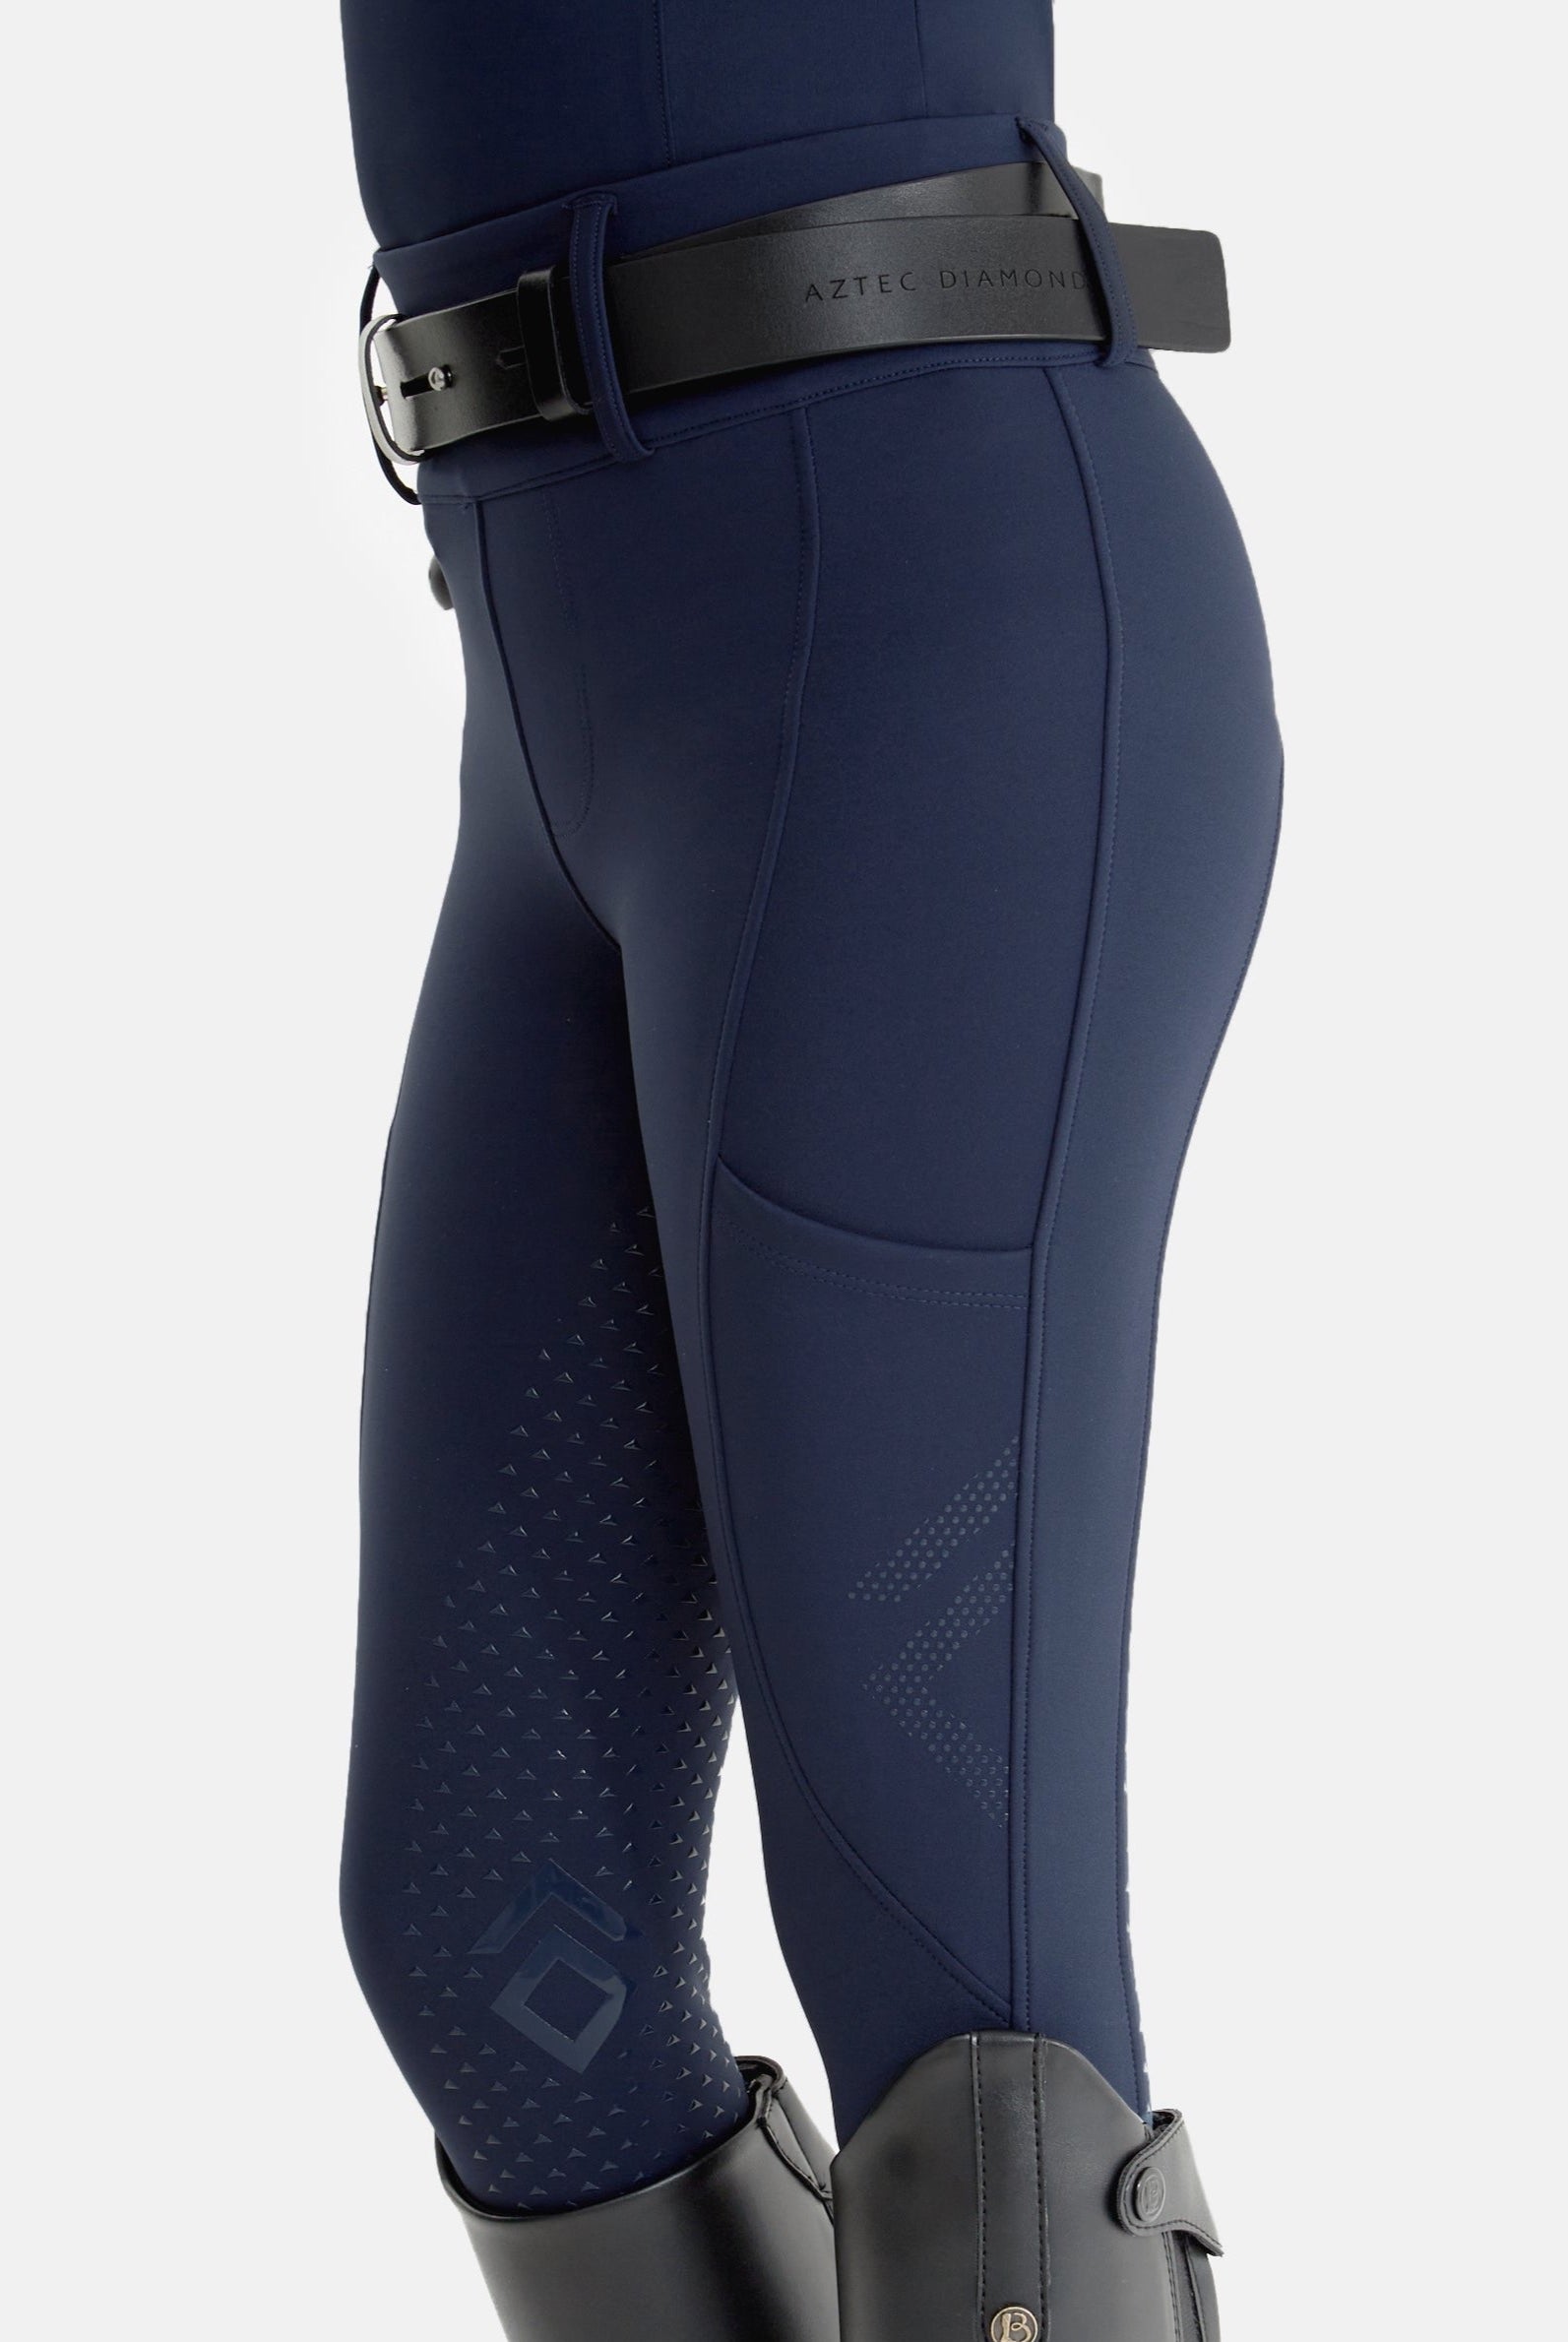 YR Navy Full Seat Compression Breeches